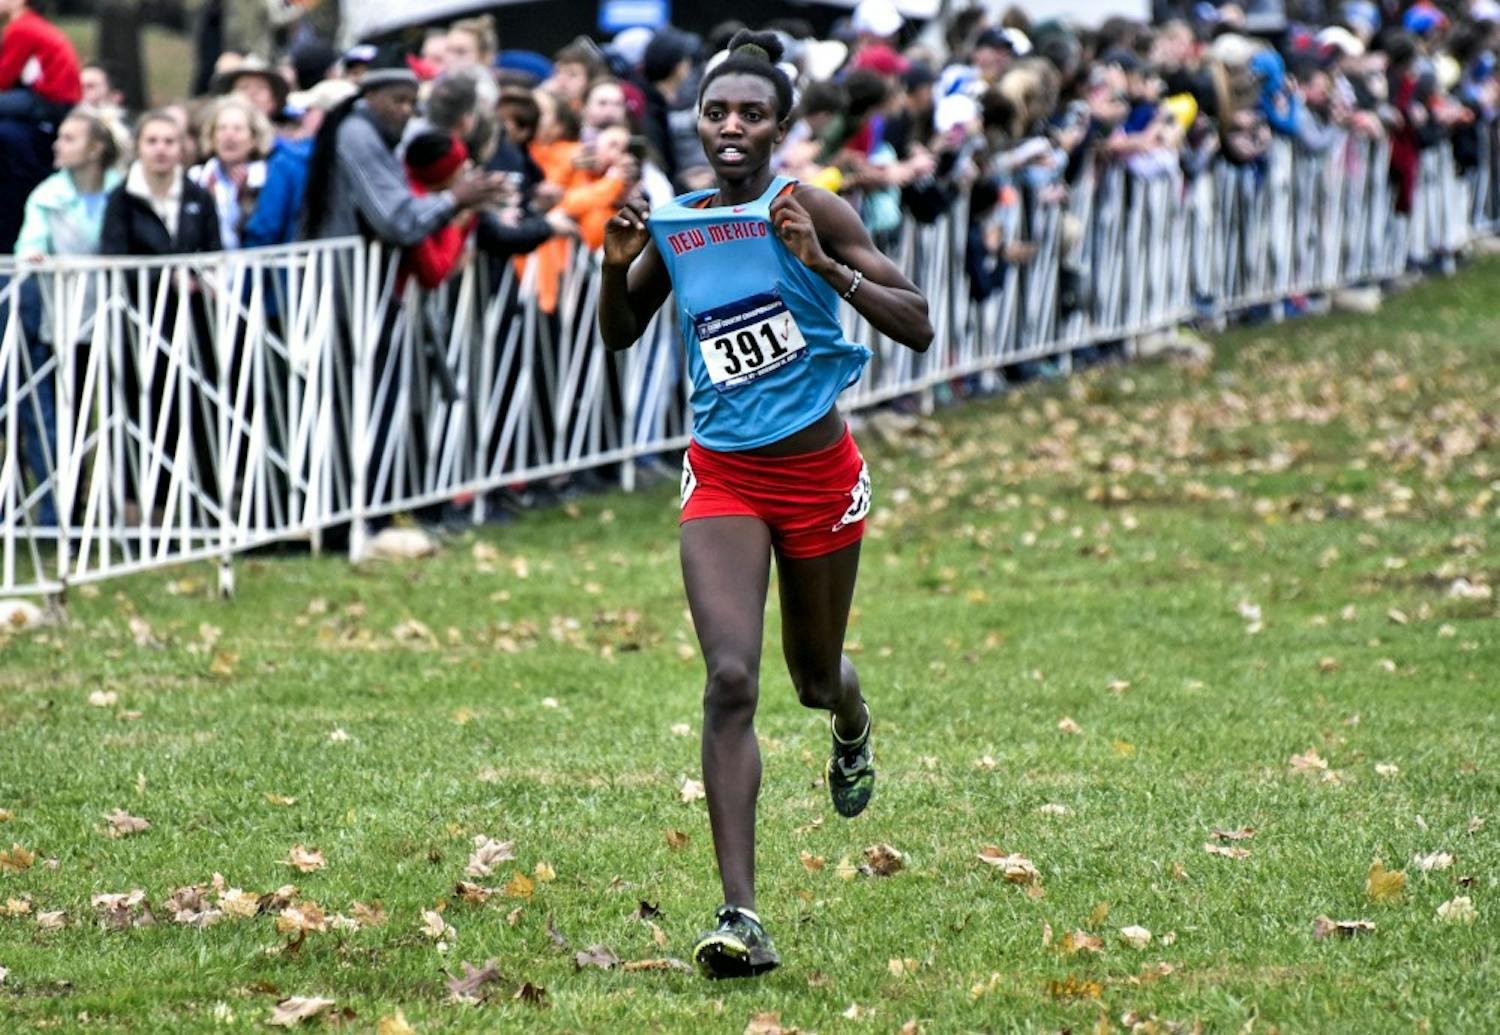 UNM?s Ednah Kurgat took first place overall at the 2017 NCAA Championships in Division I Cross Country in Louisville, Kentucky on Nov. 18, 2017. Kurgat is a sophomore transfer from Liberty University.